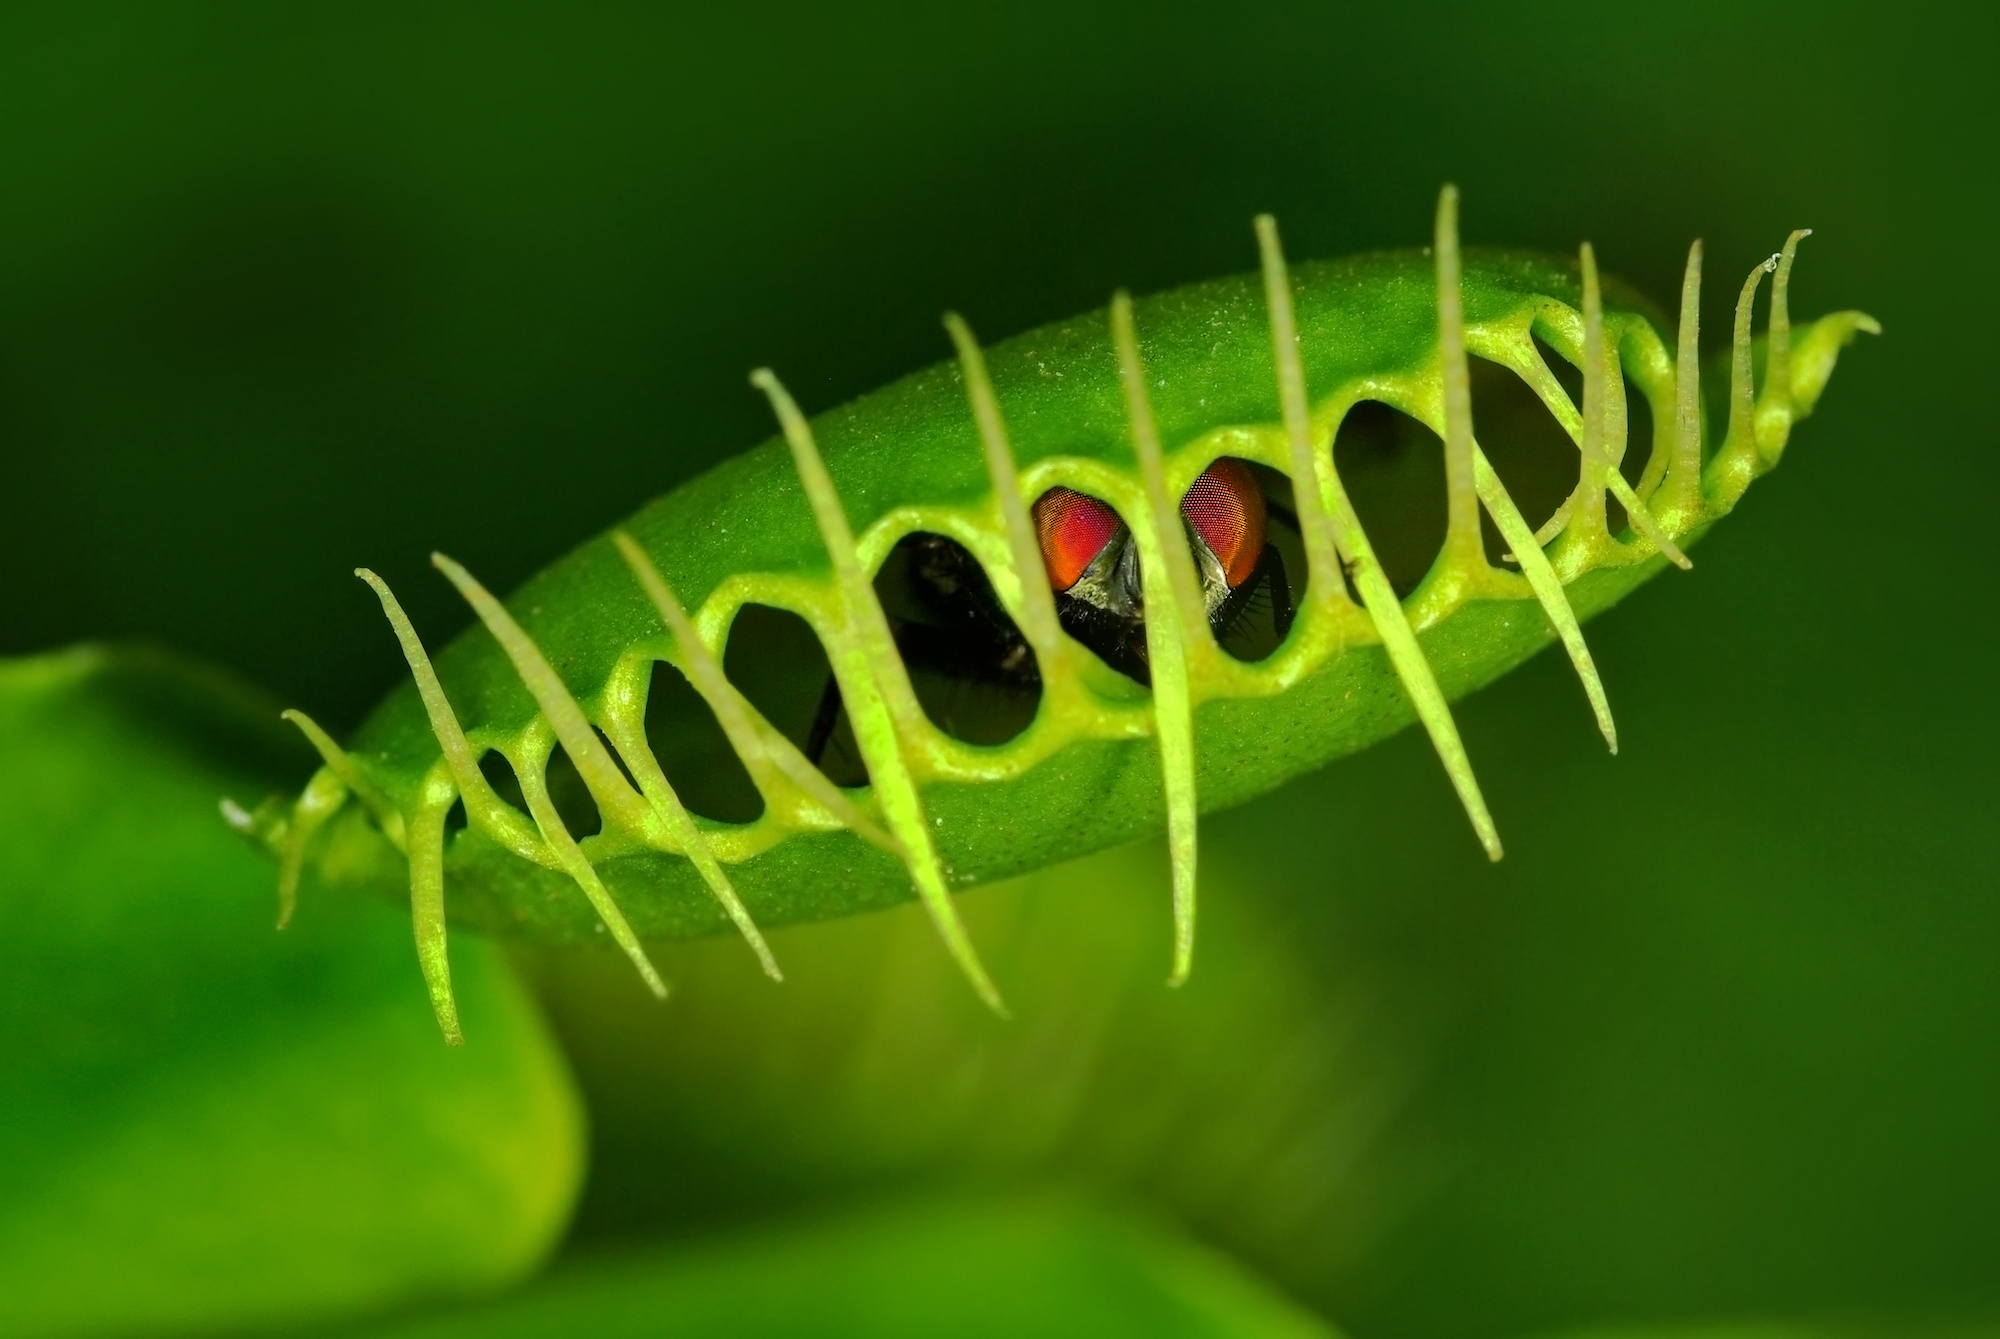 Venus flytrap (Dionaea muscipula) with trapped fly